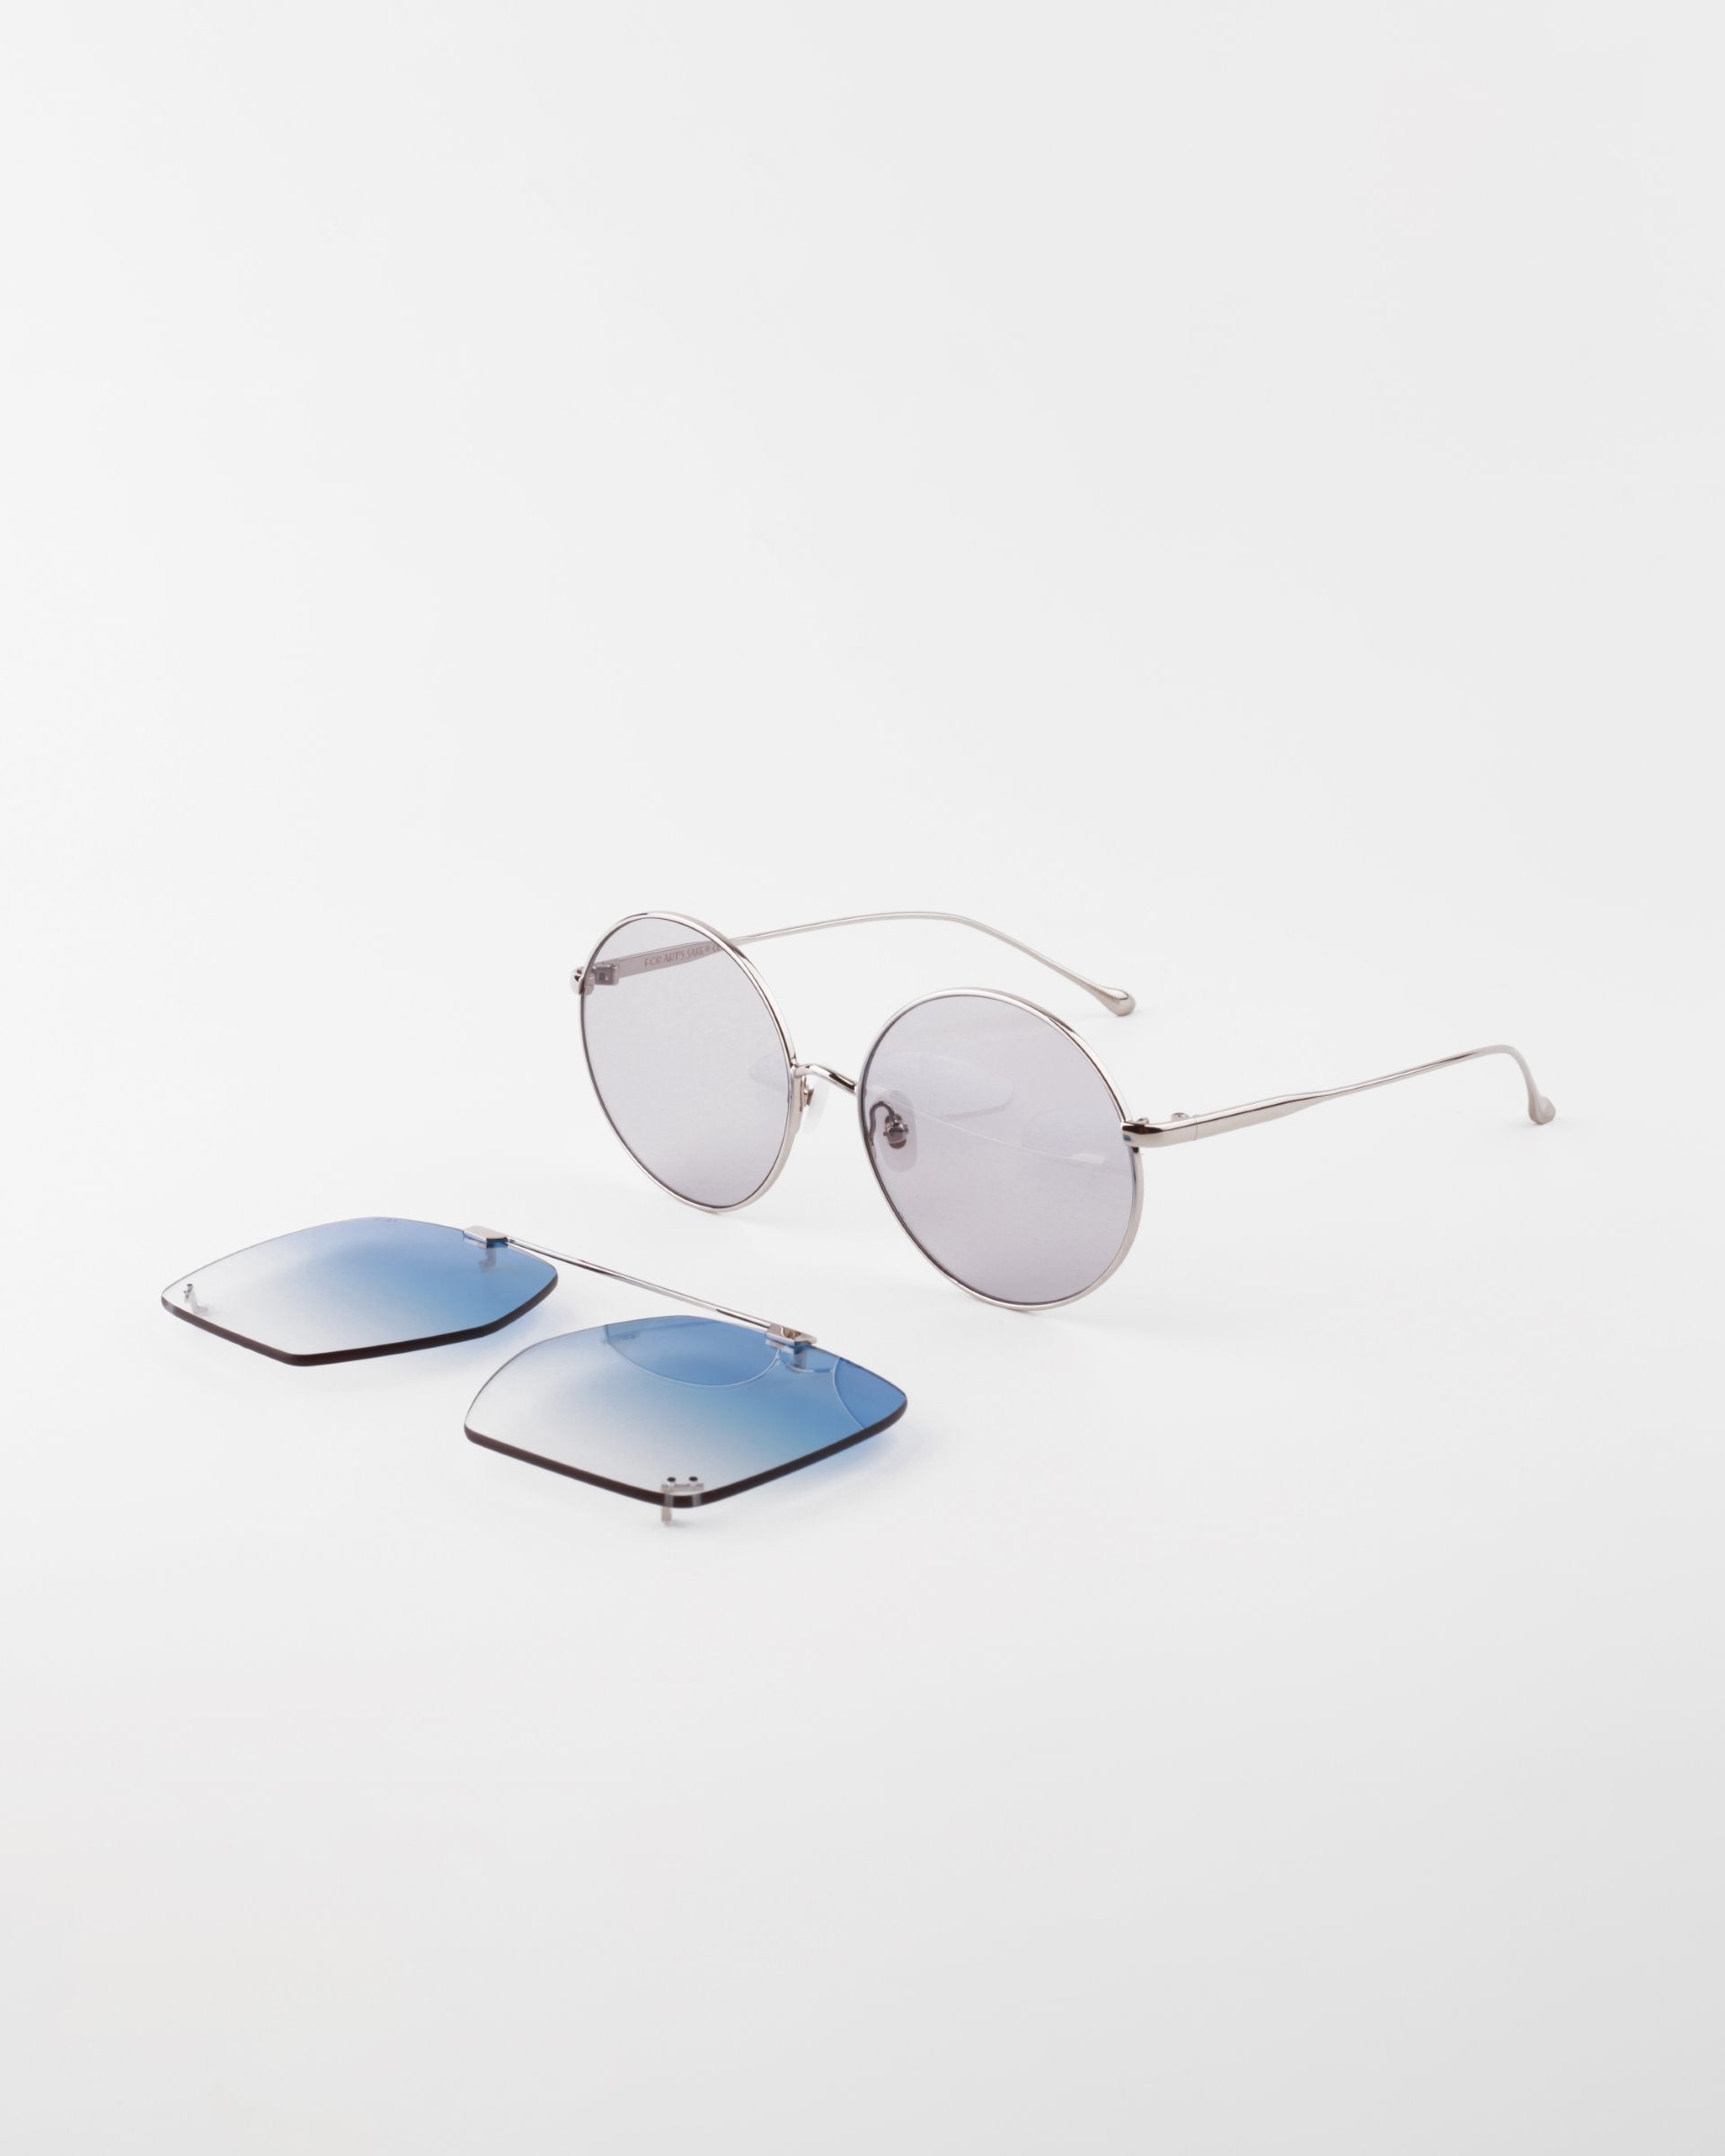 A pair of round, silver-framed eyeglasses with detachable blue-tinted sun lenses on a white background. The For Art's Sake® Last Summer detachable aviator frame offers reversible functionality, with the blue-tinted lenses positioned in front of the glasses for UVA & UVB protection.